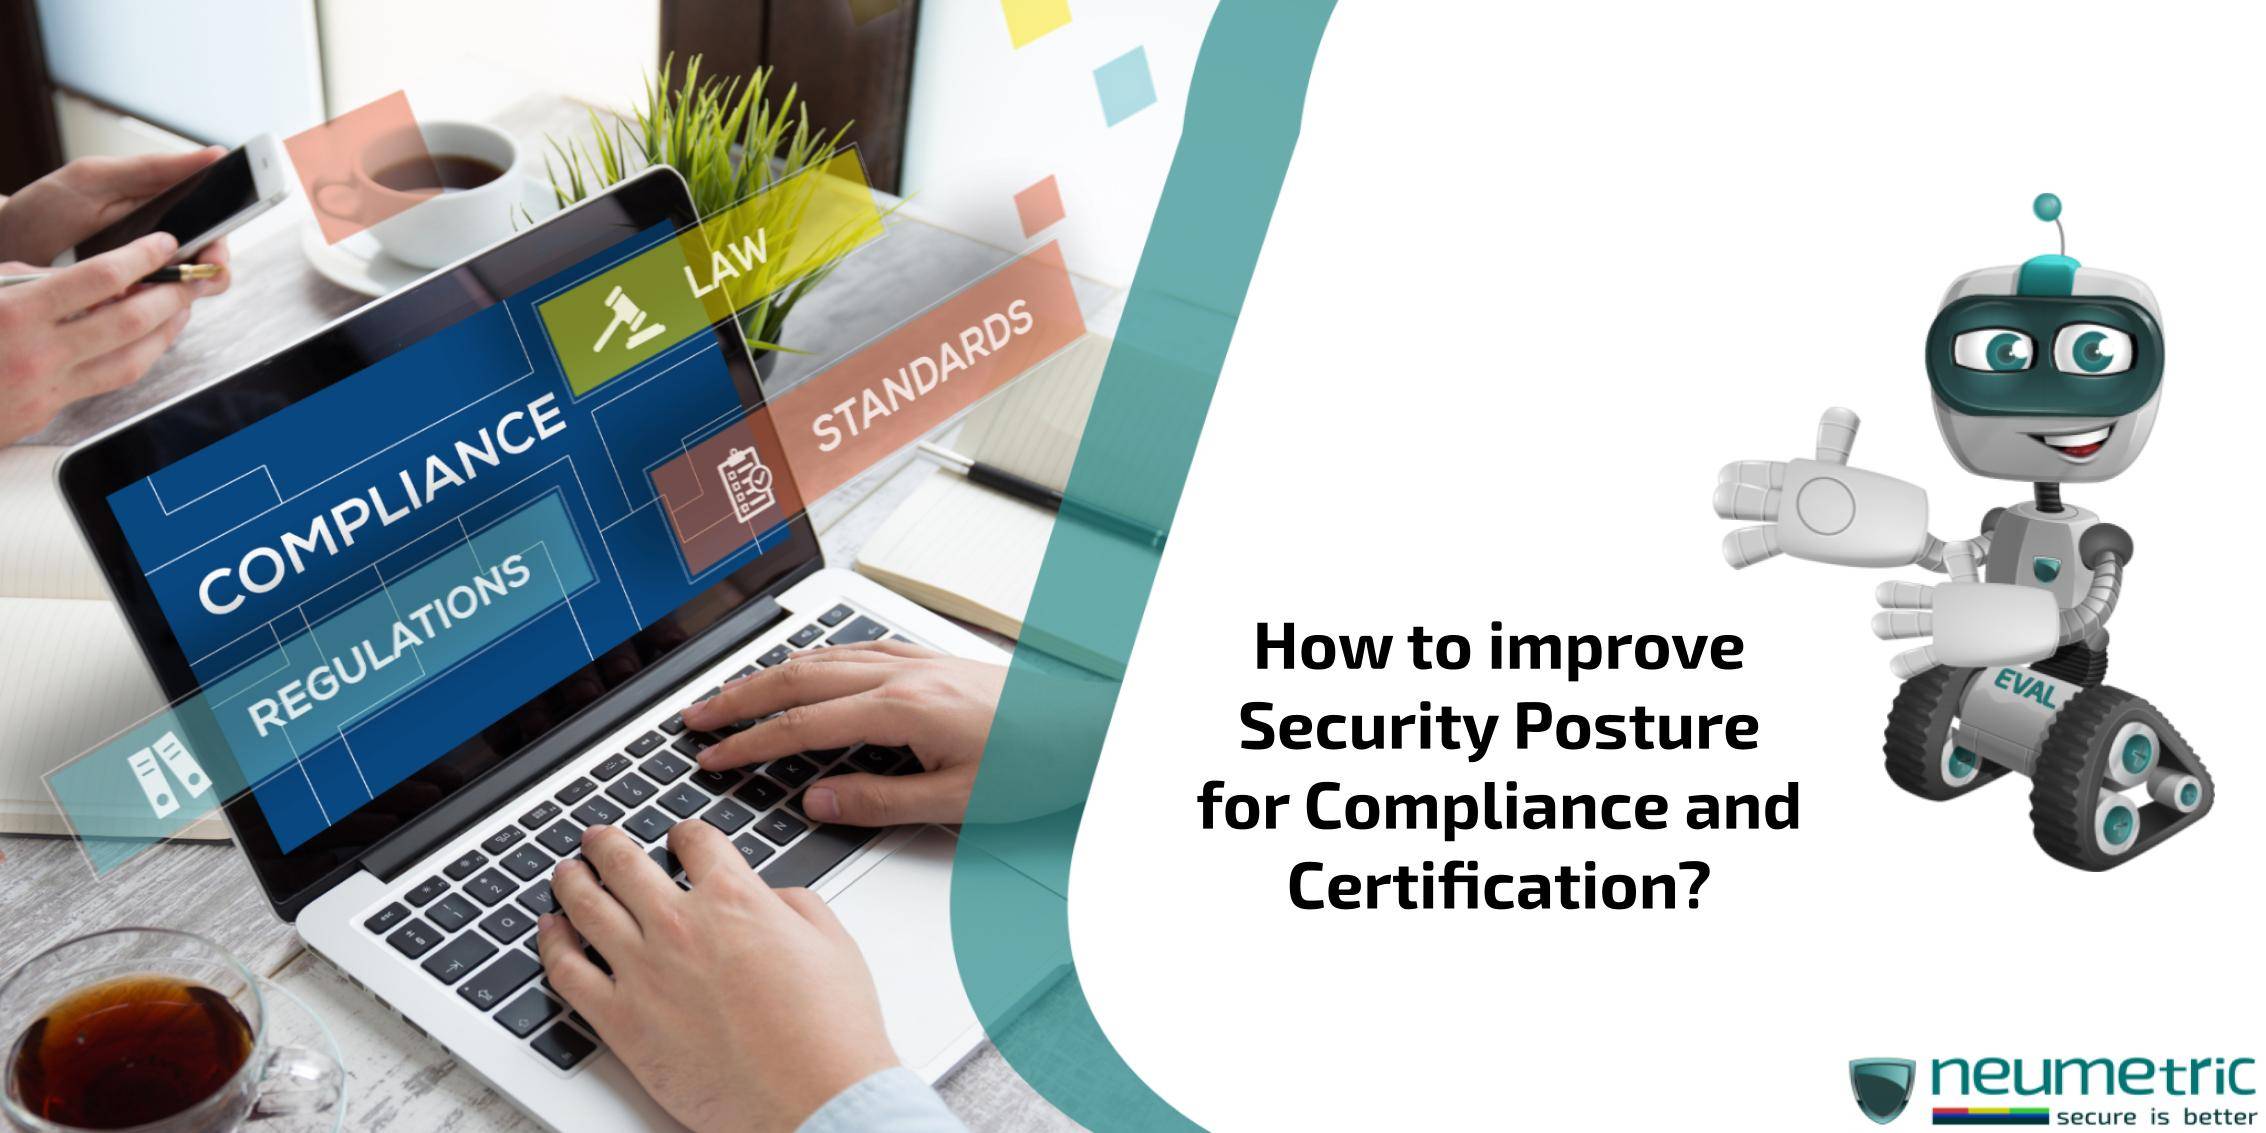 How to improve Security Posture for Compliance and Certification?